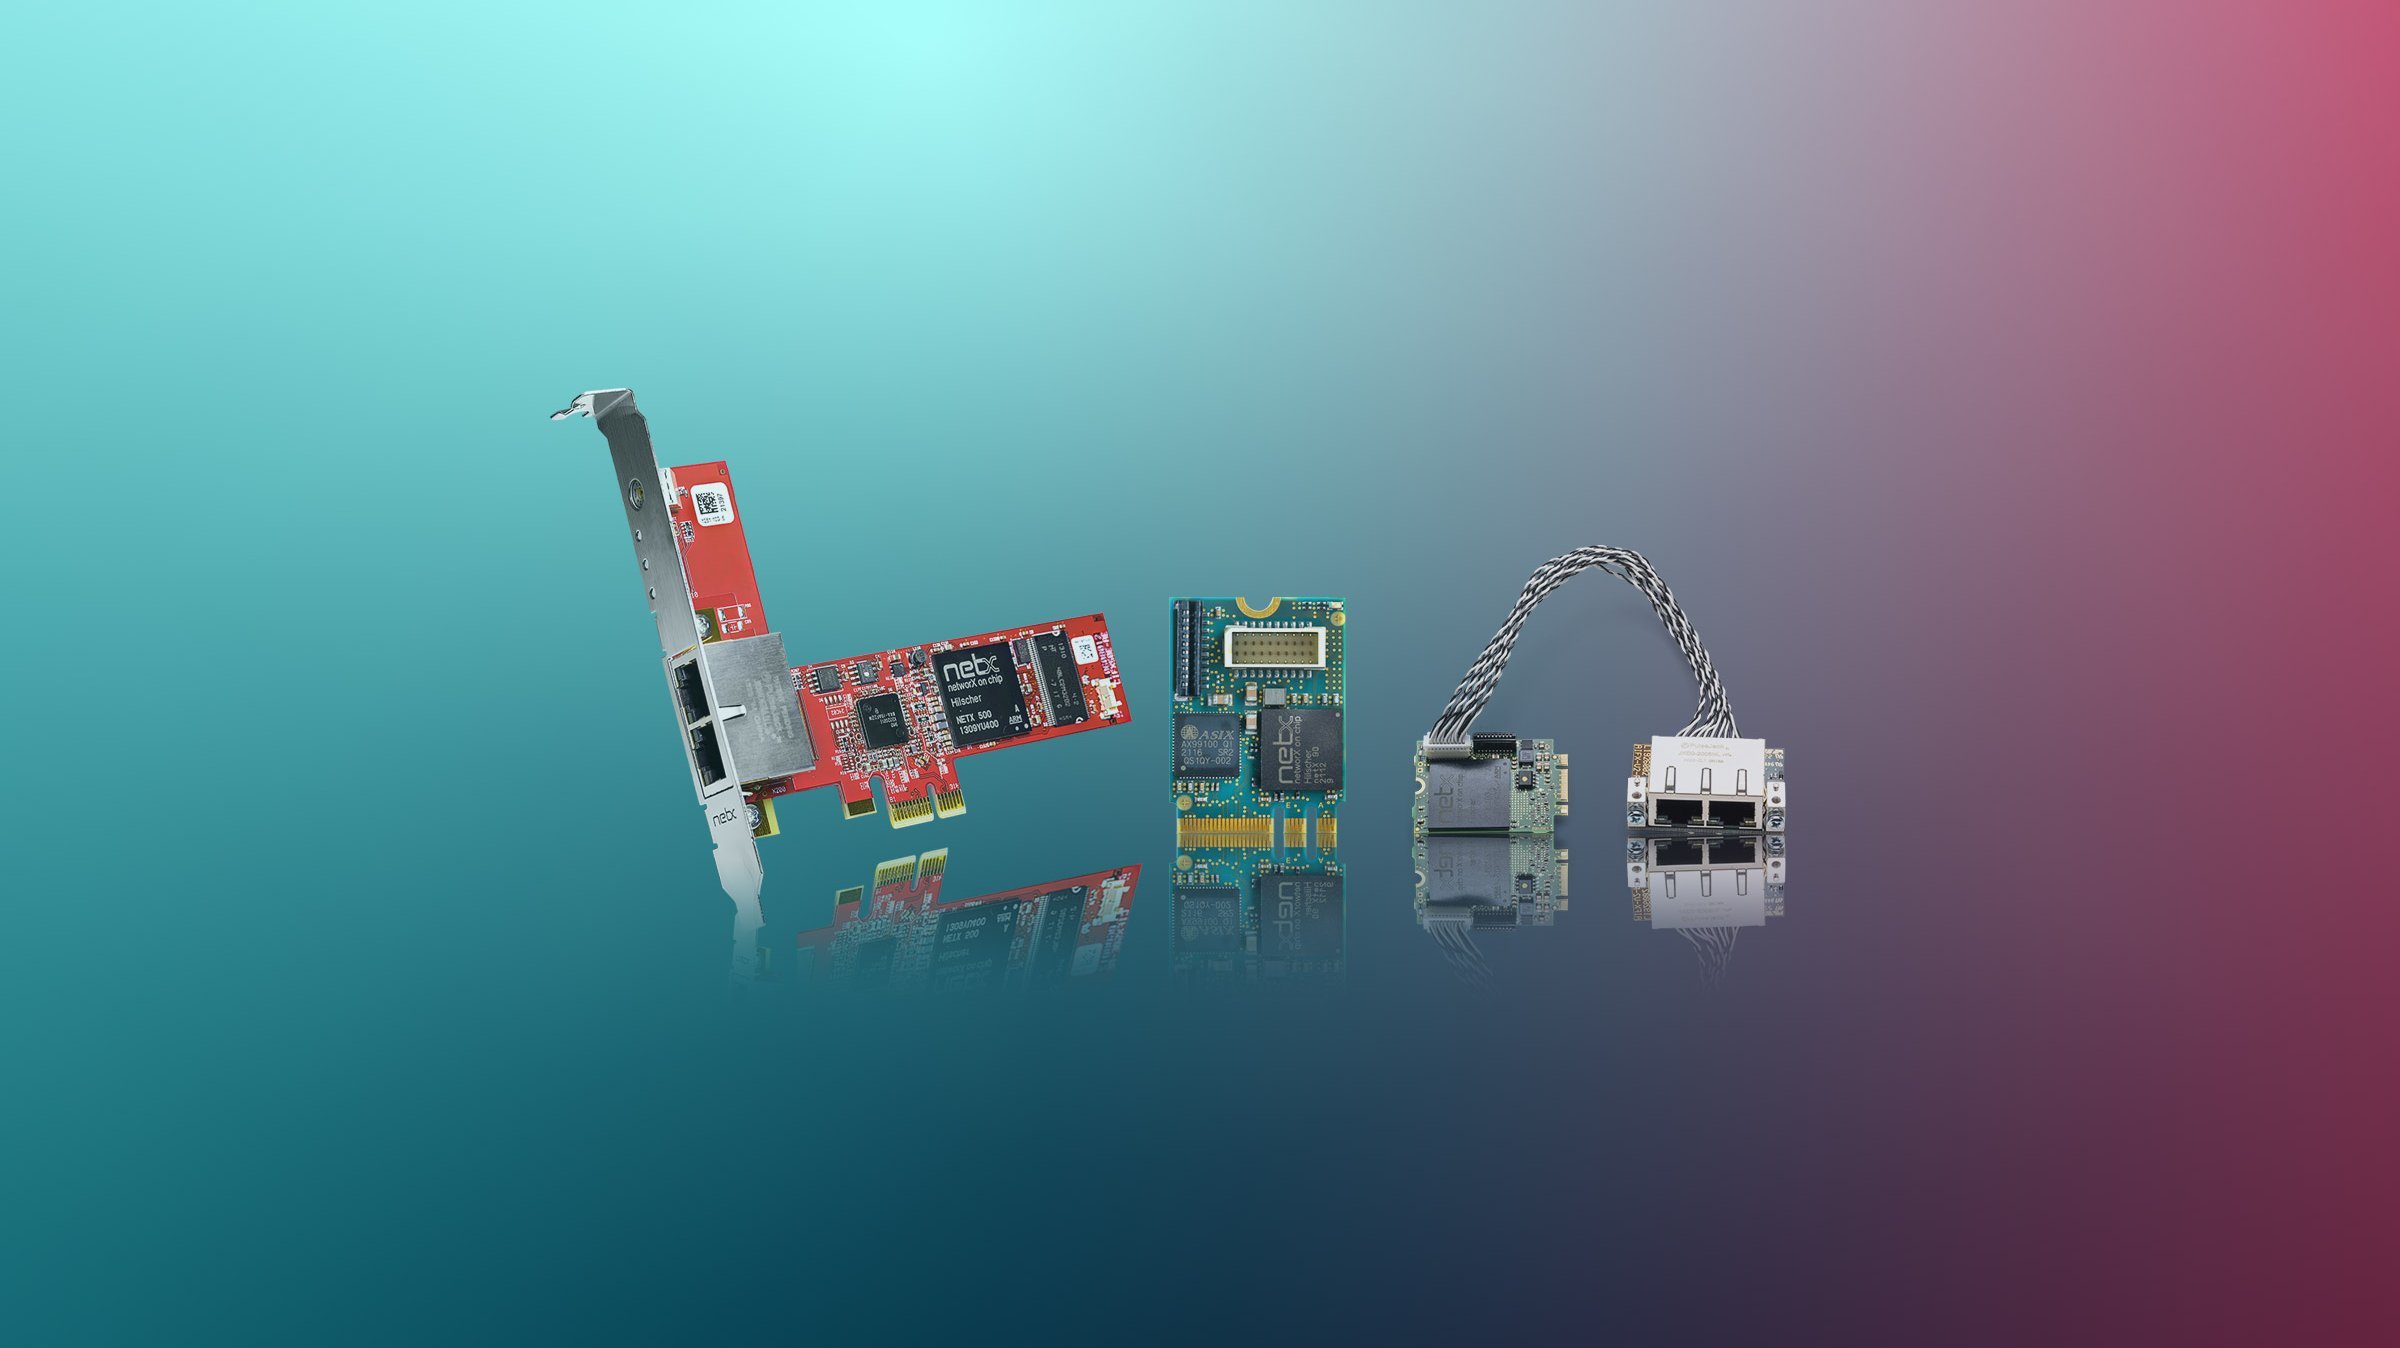 Three PC cards on a colorful background. One has a red PCB while the other two are green. One has an AIFX detached network interface connected to it.